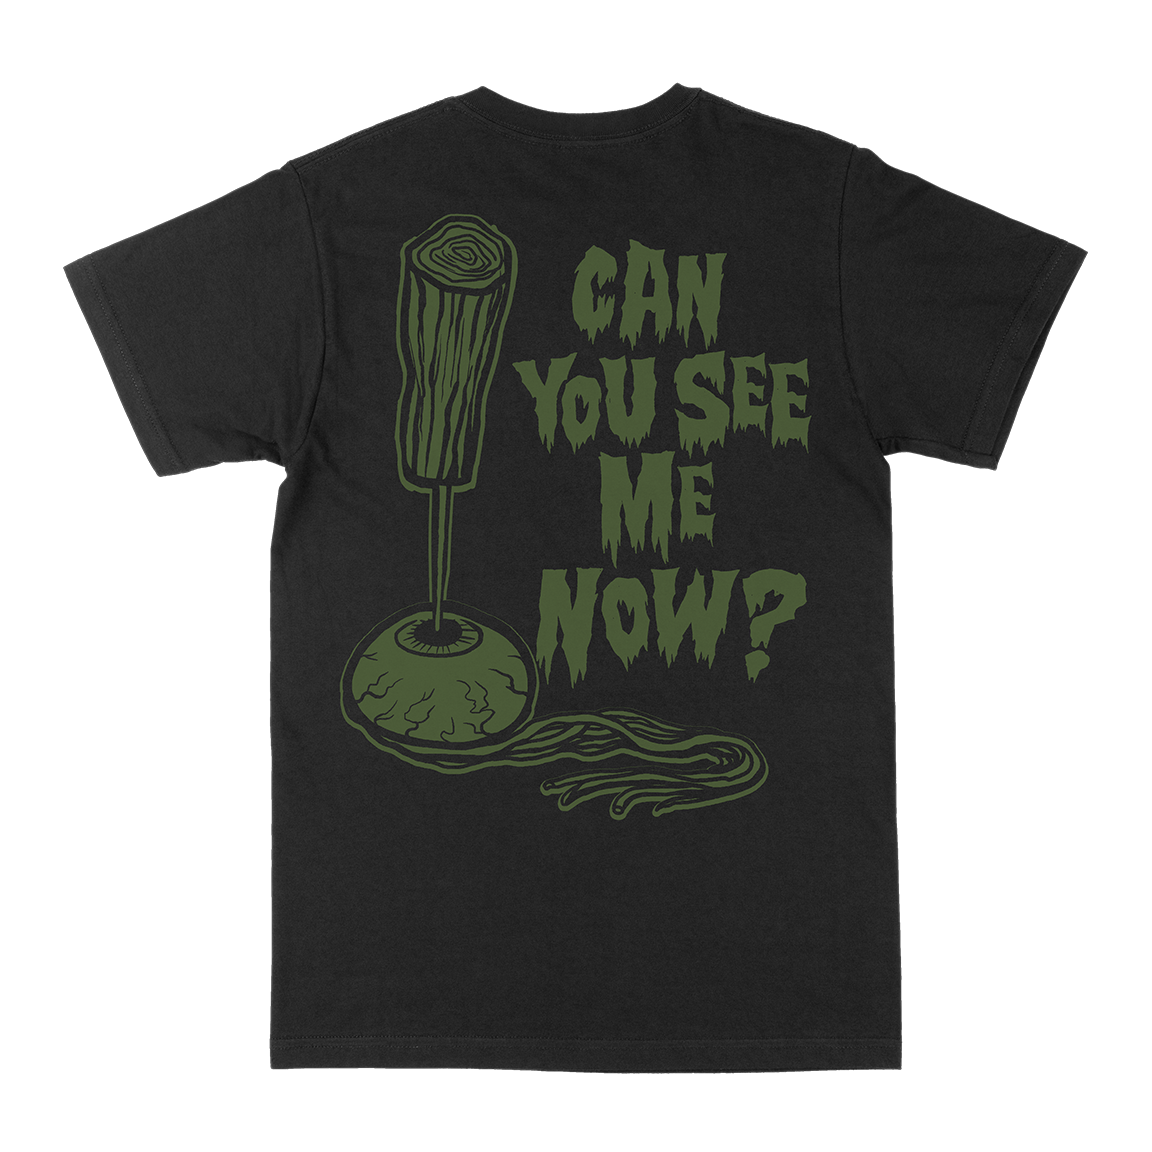 HIGH ON FIRE "Can You See Me Now?" Black T-Shirt